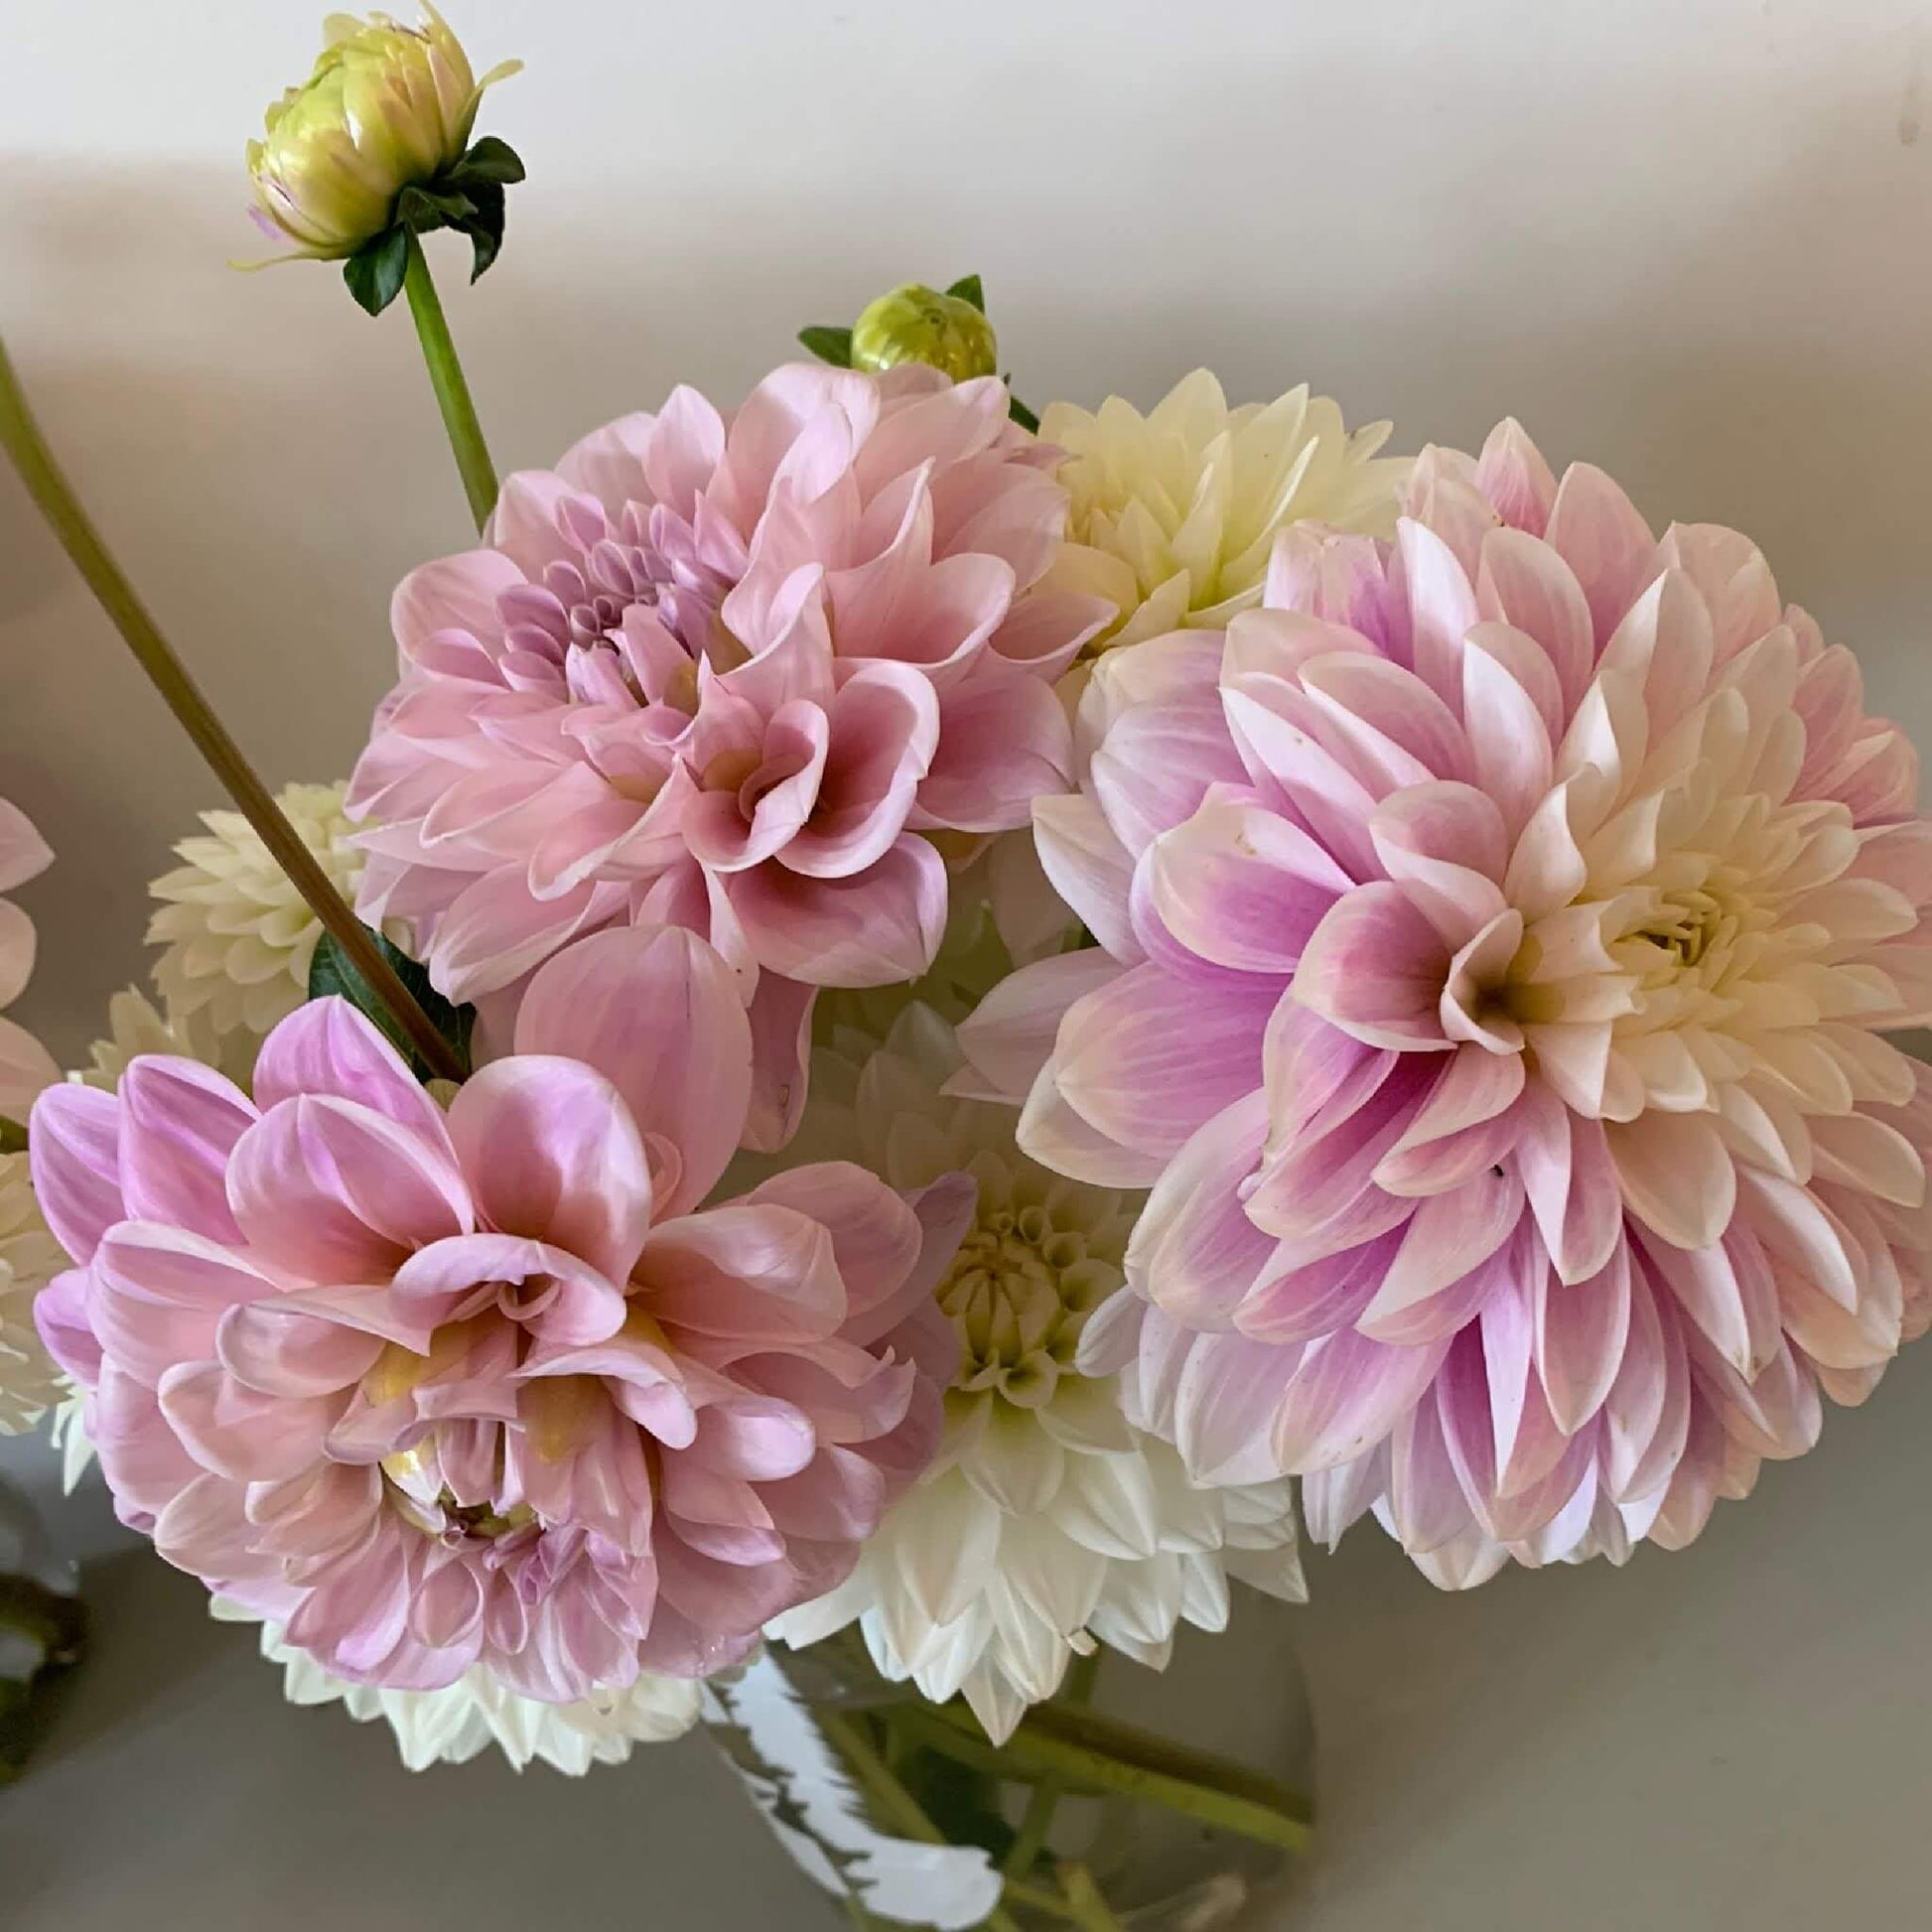 Coseytown Kay dahlia flowers for sale